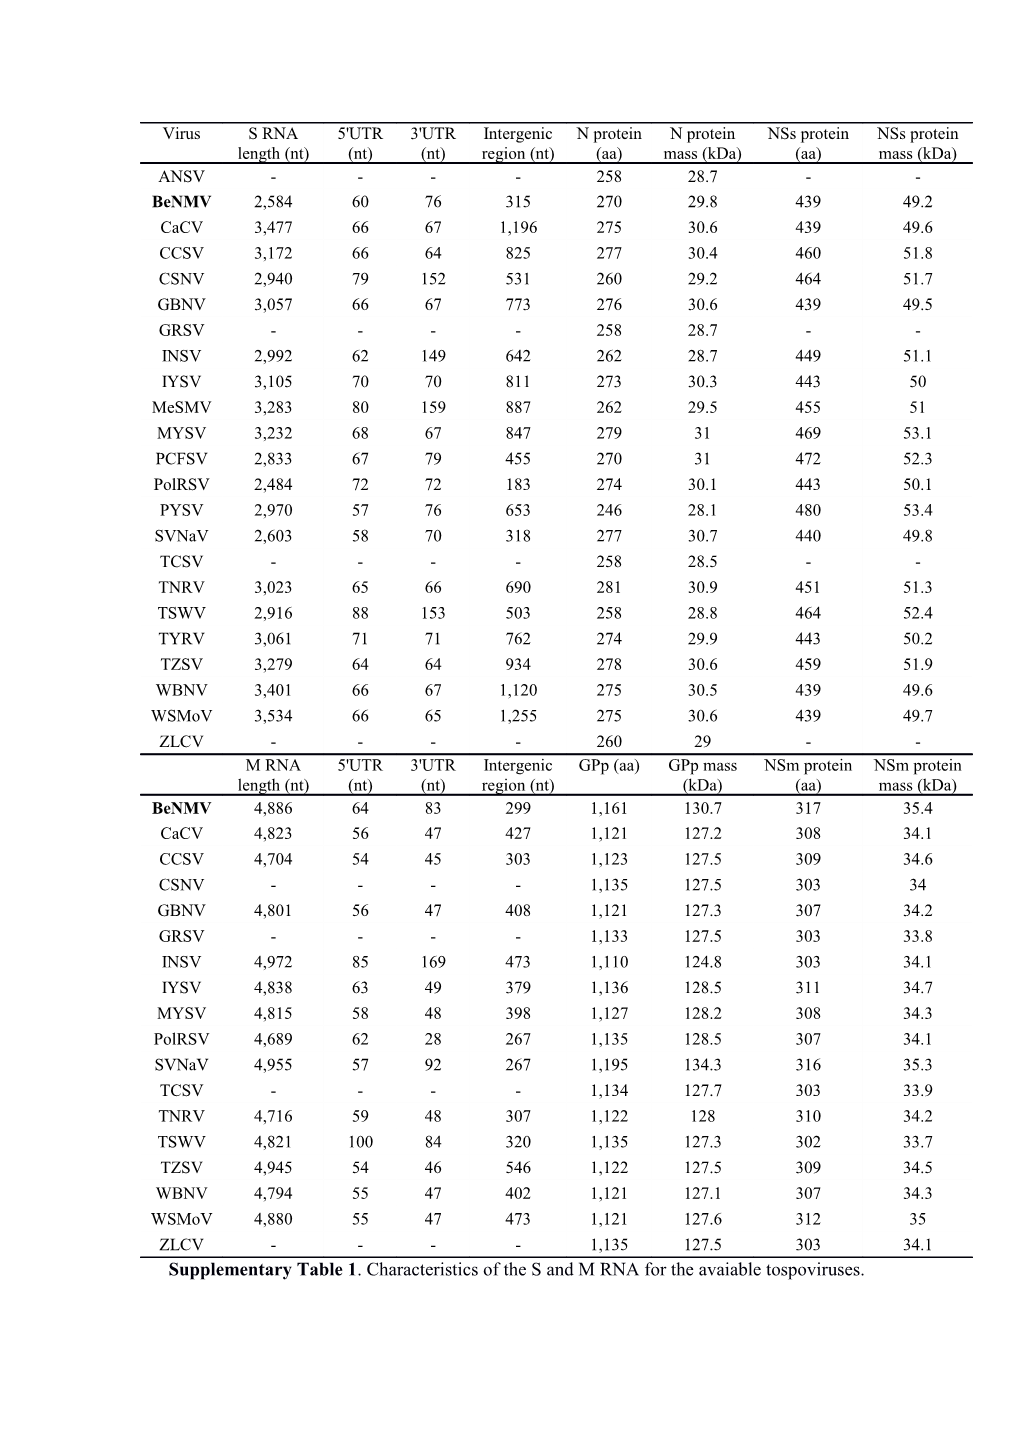 Supplementary Table 1 . Characteristics of the S and M RNA for the Avaiable Tospoviruses